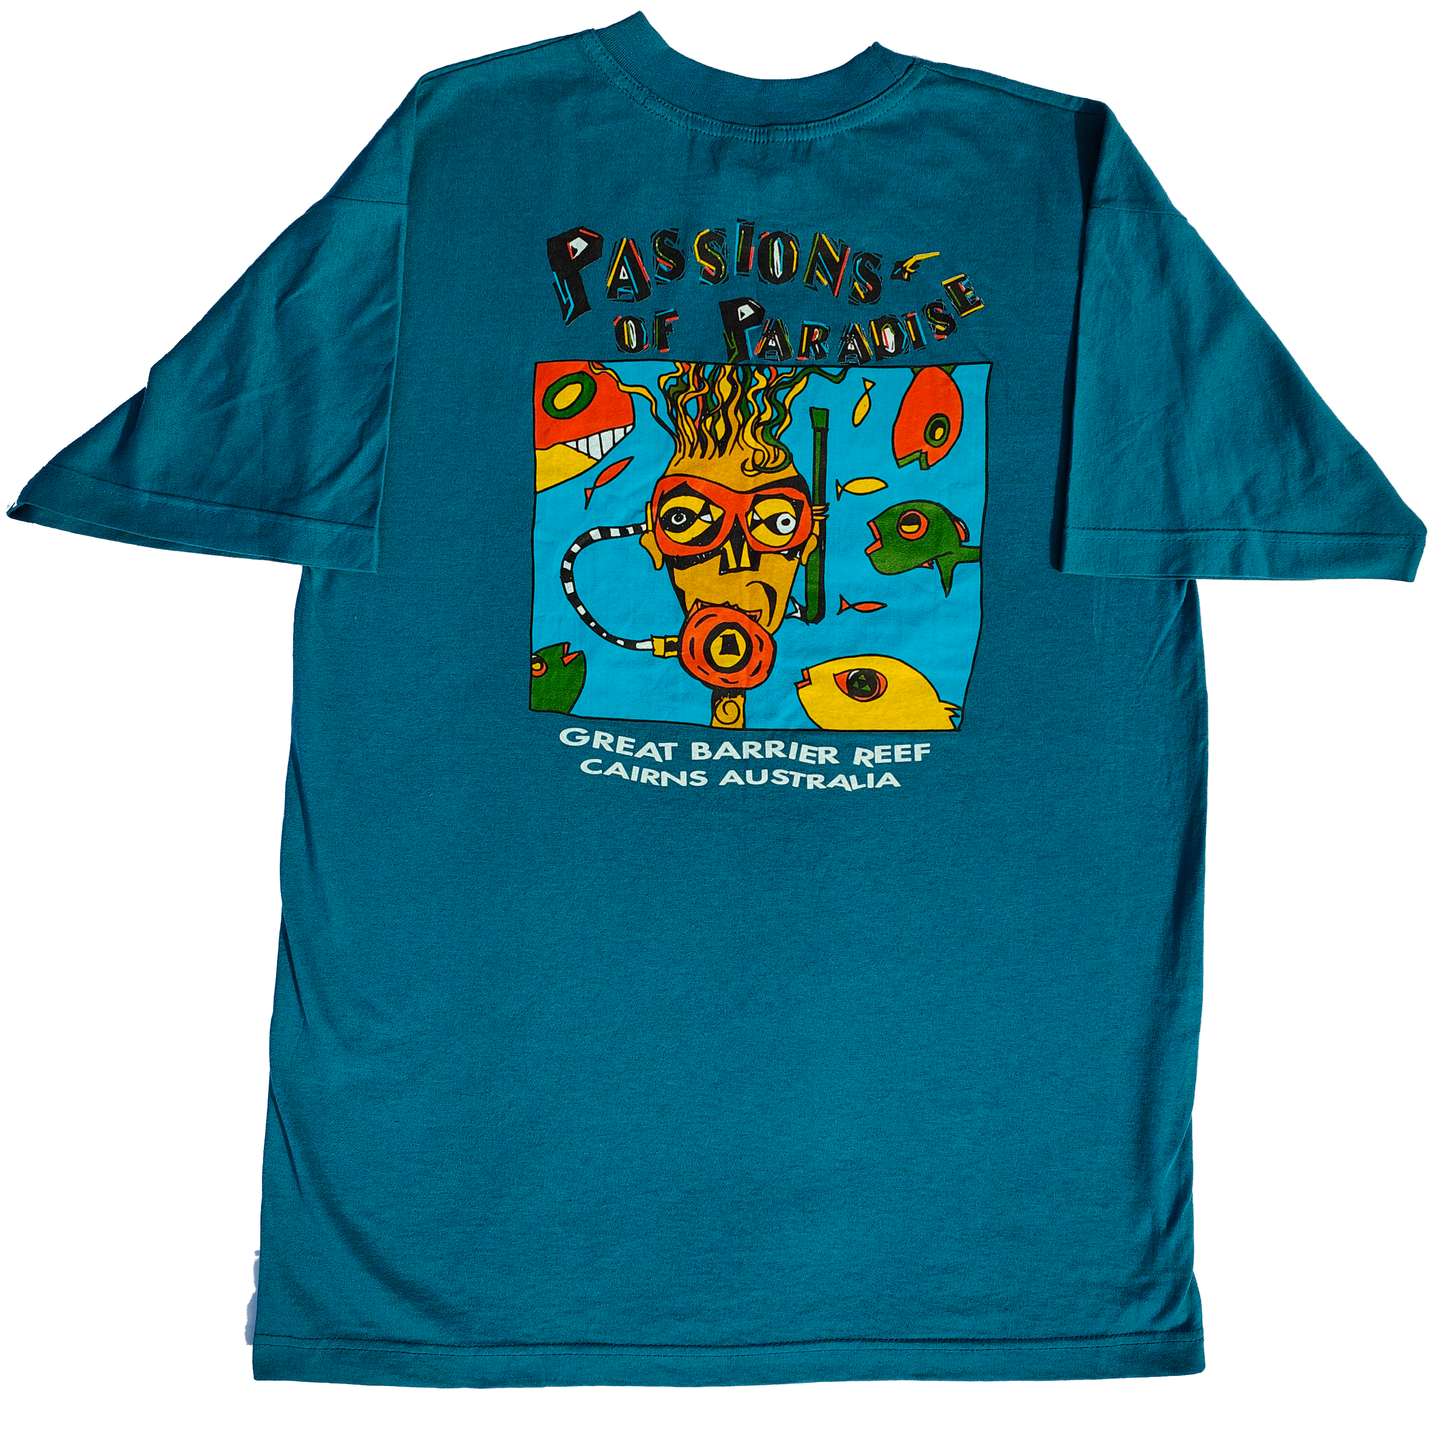 Vintage Great Barrier Reef T Shirt - XL